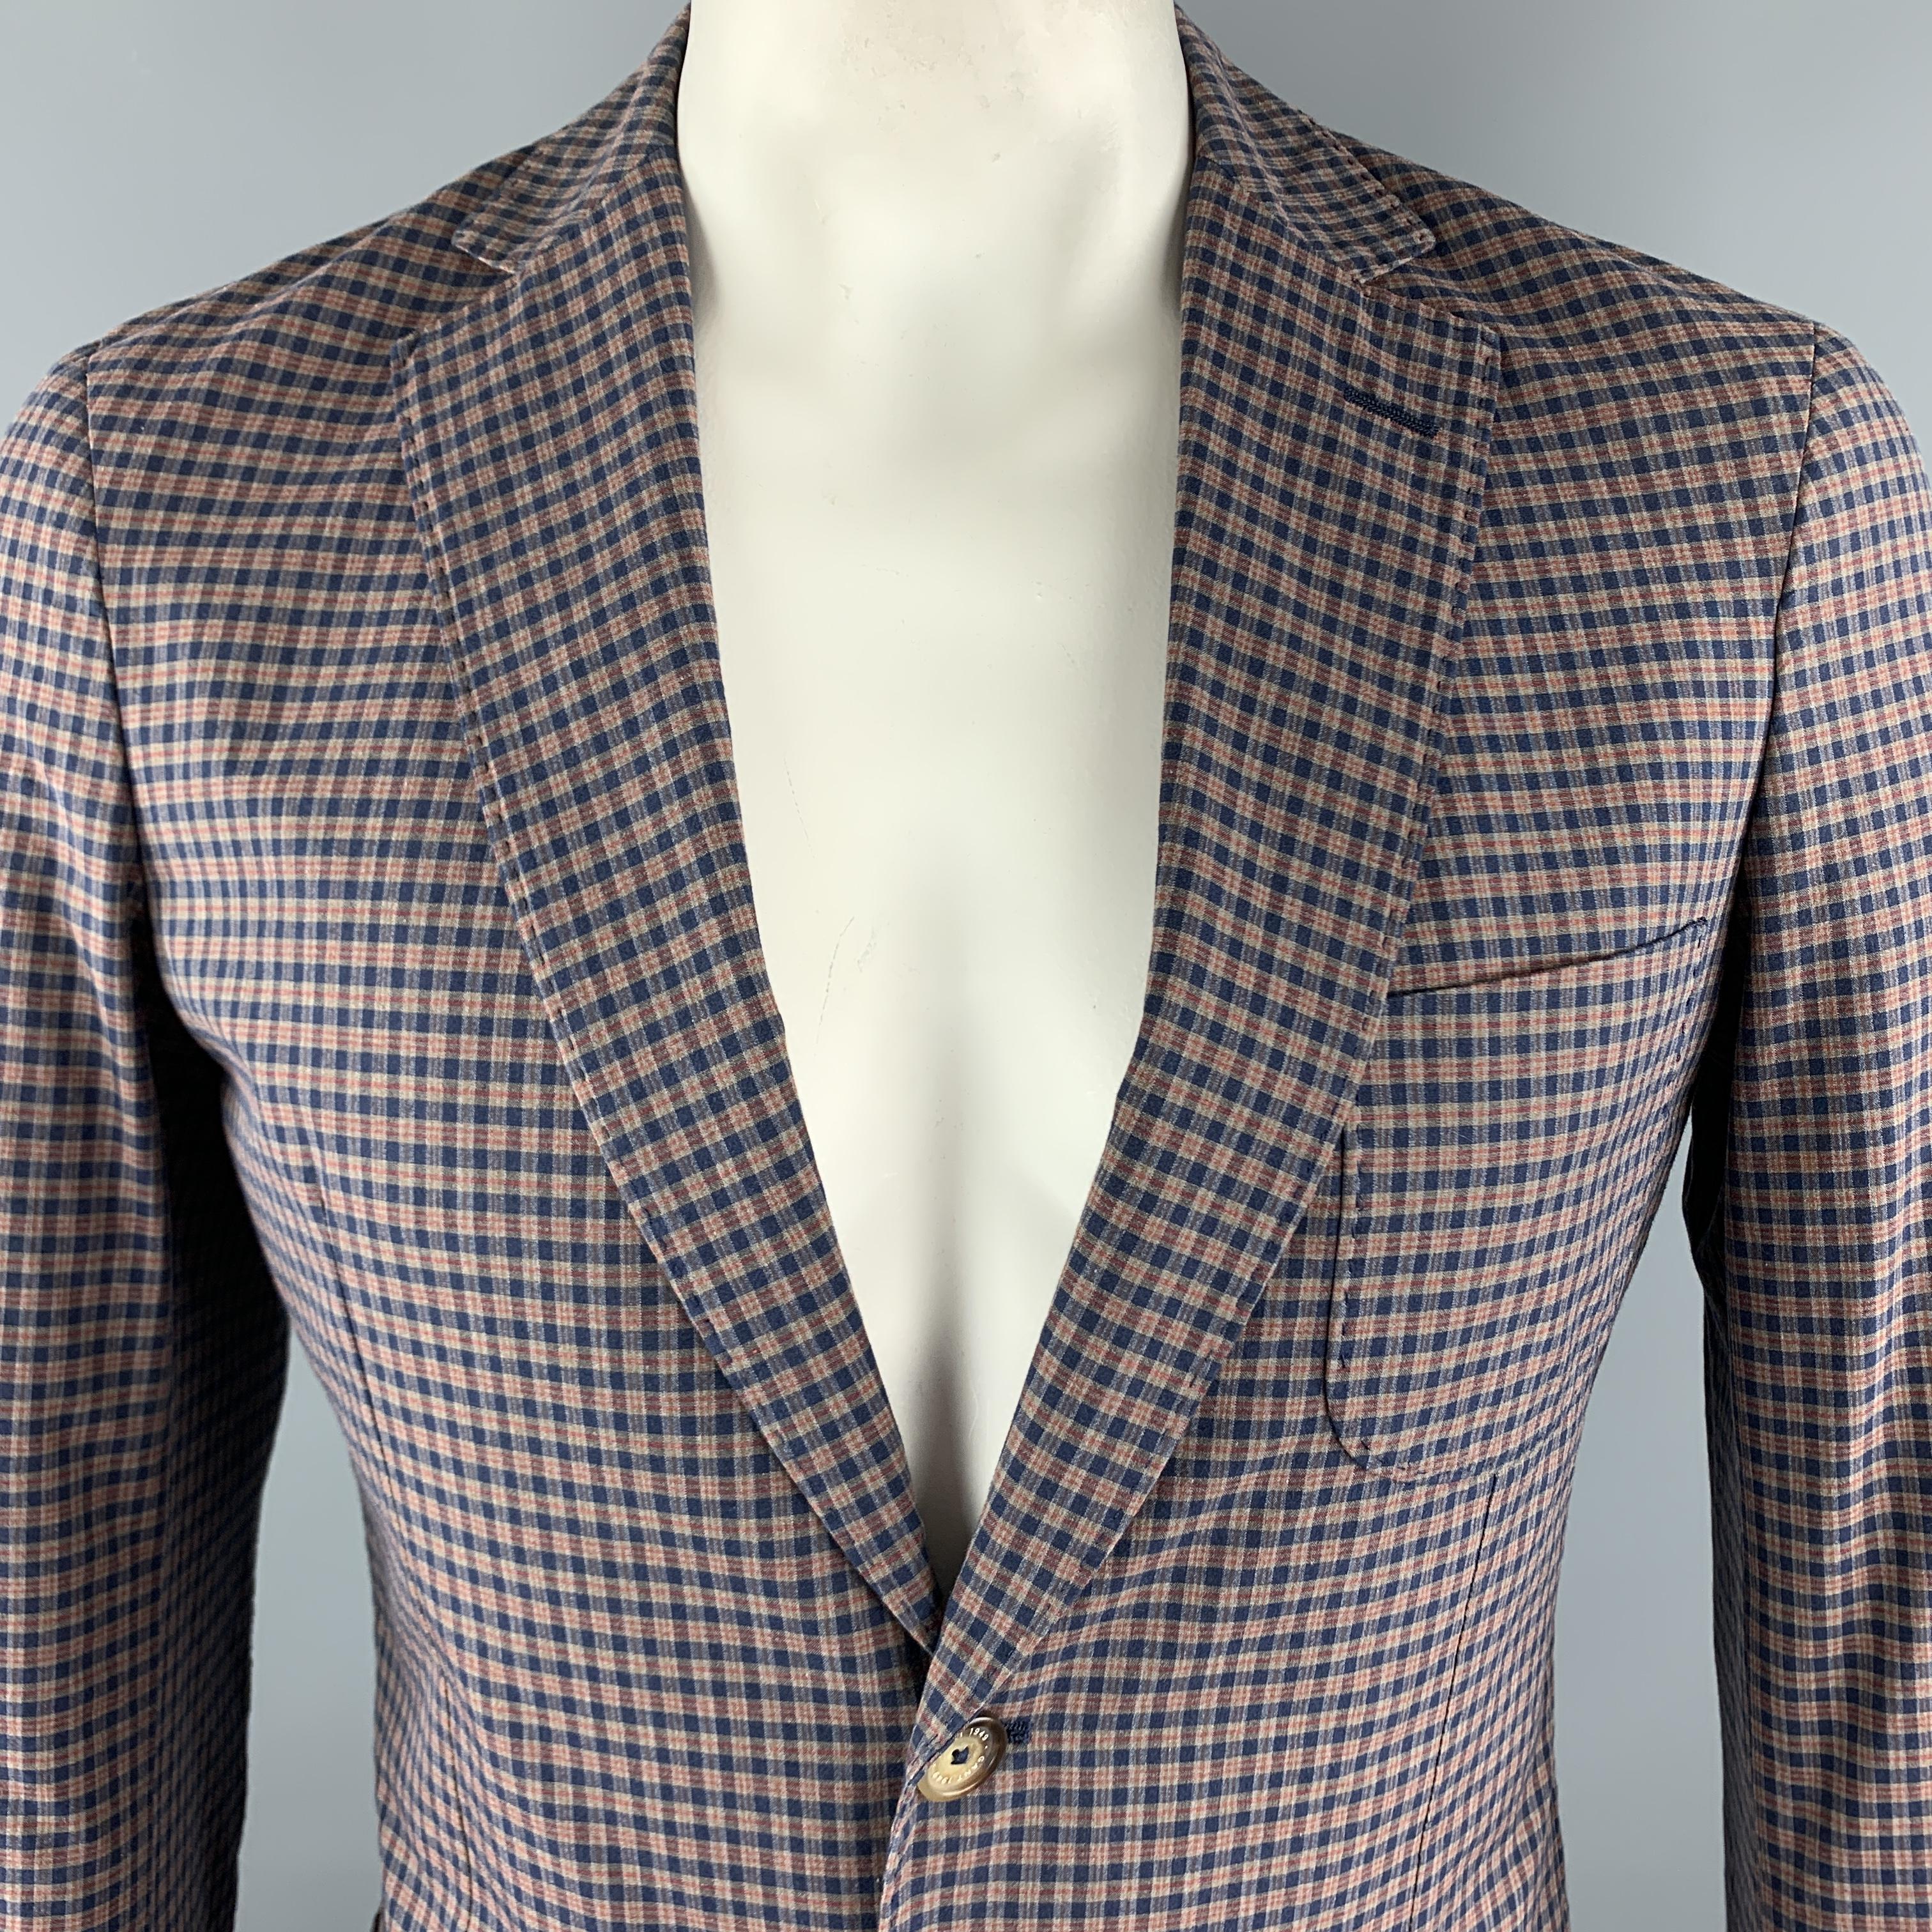 GANT by MICHAEL BASTIAN Sport Coat comes in navy and olive plaid cotton material, with a notch lapel, patch pockets, two buttons at closure, single breasted,elbow patches, functional buttons at cuffs and a double vent at back. Made in Portugal.